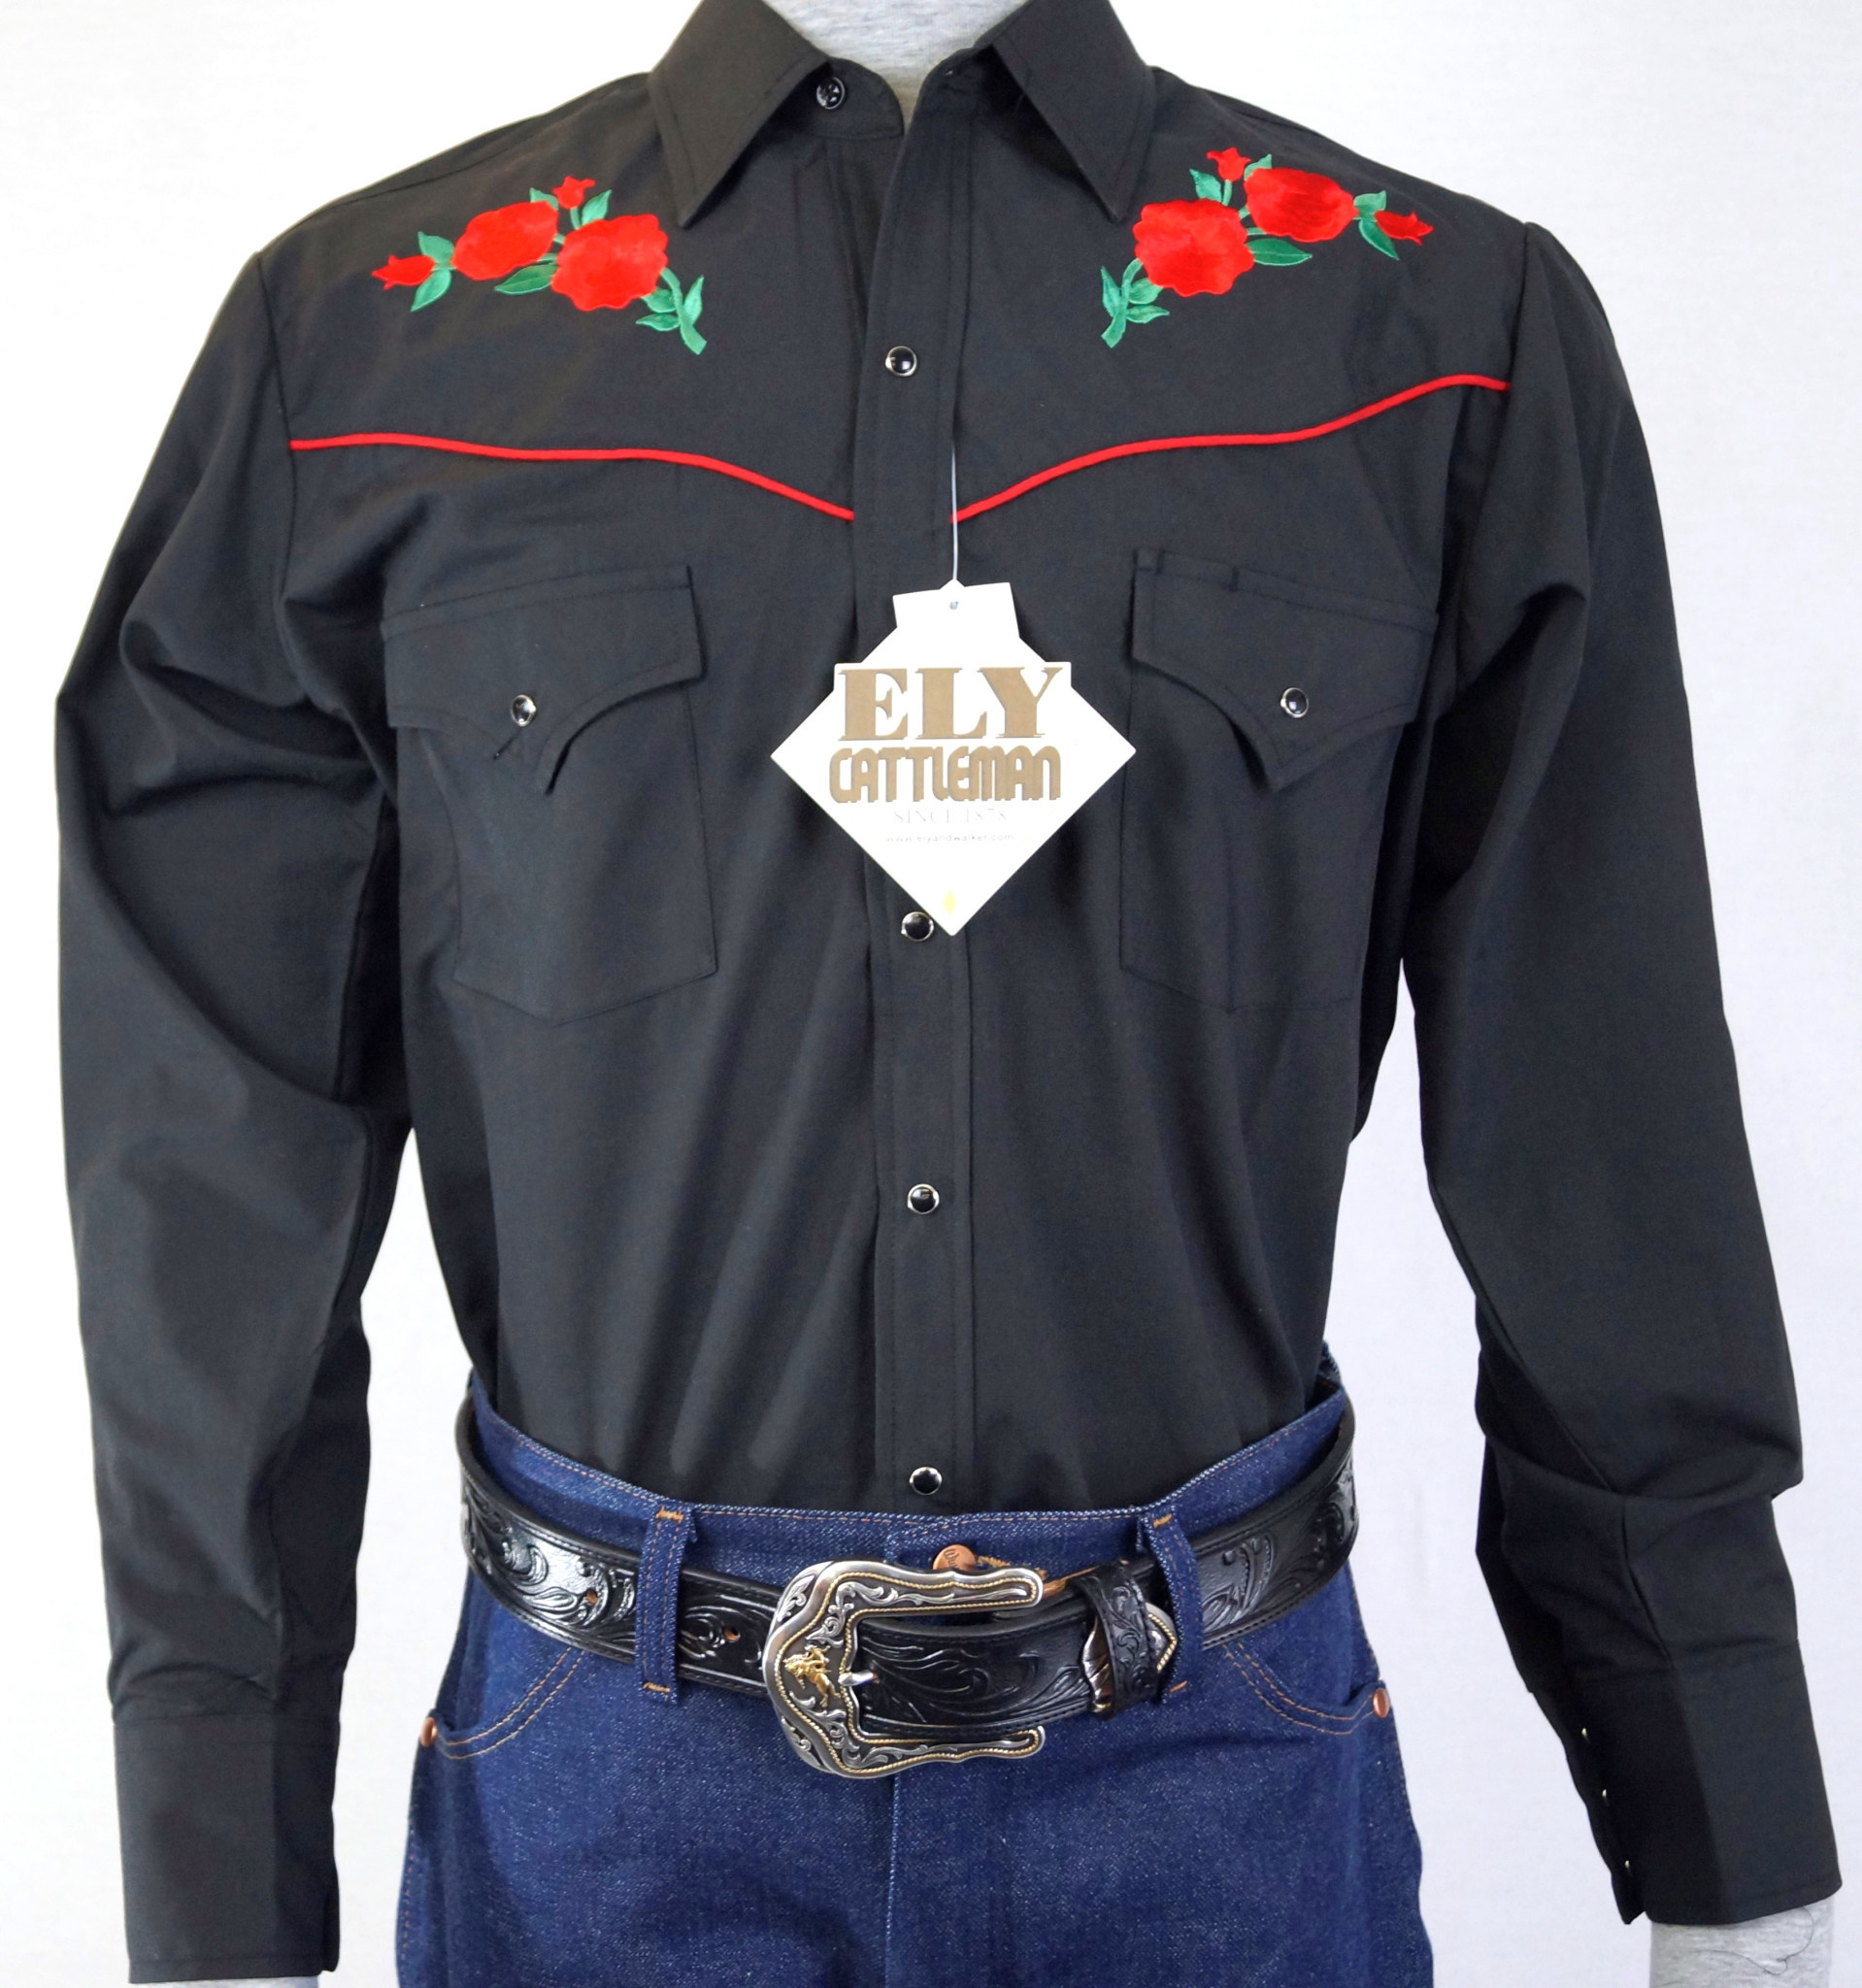 Rose Western Shirt : Western Rose Shirt Embroidered 80s Pearl Snap ...